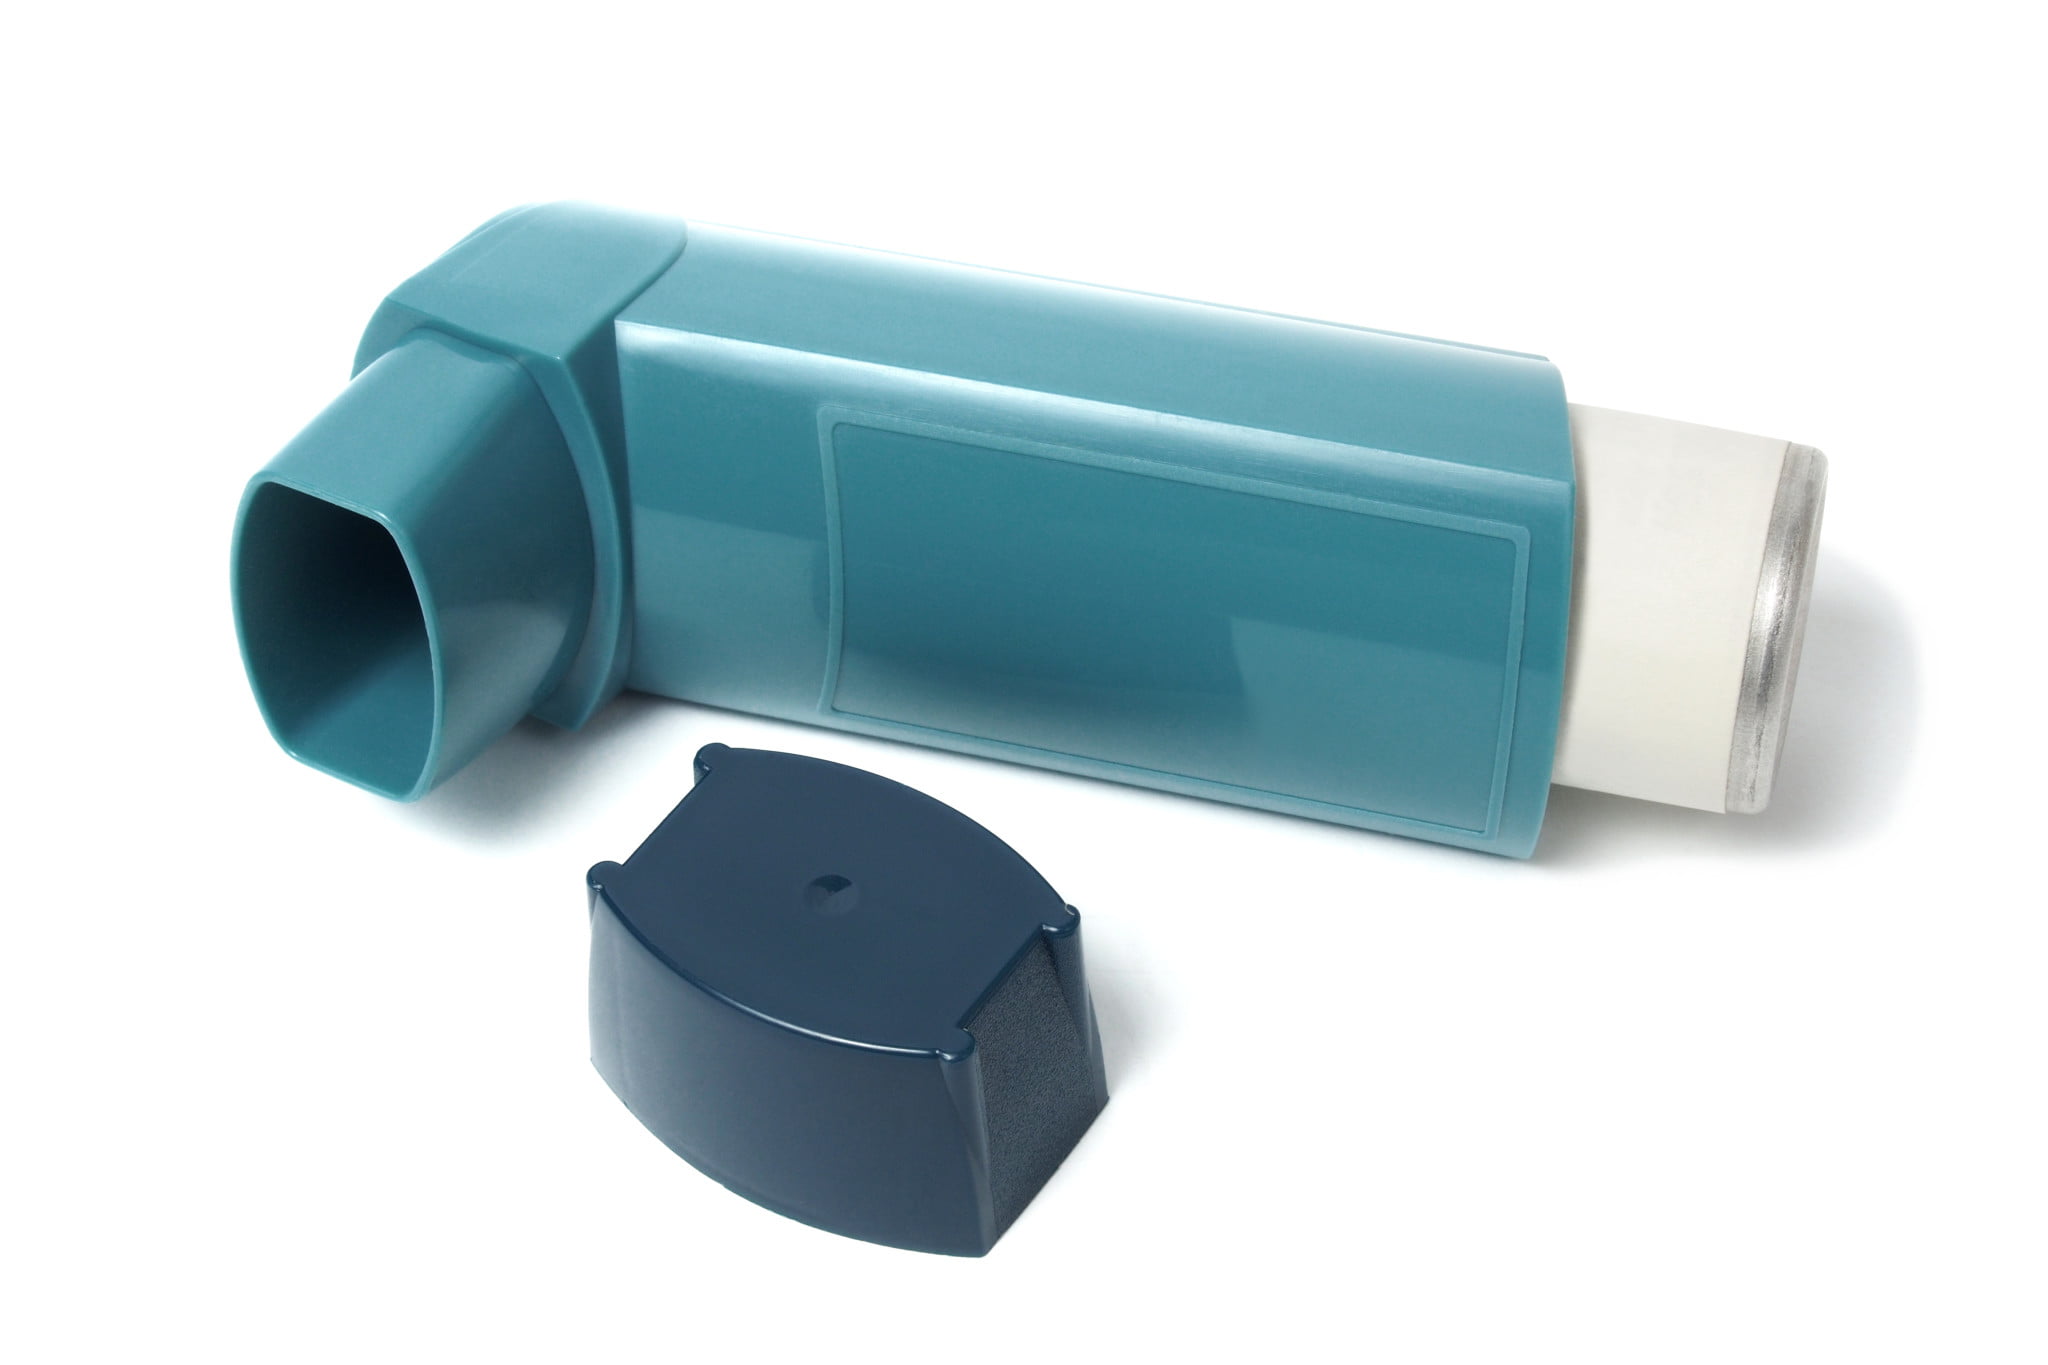 asthma reliever puffer on its side